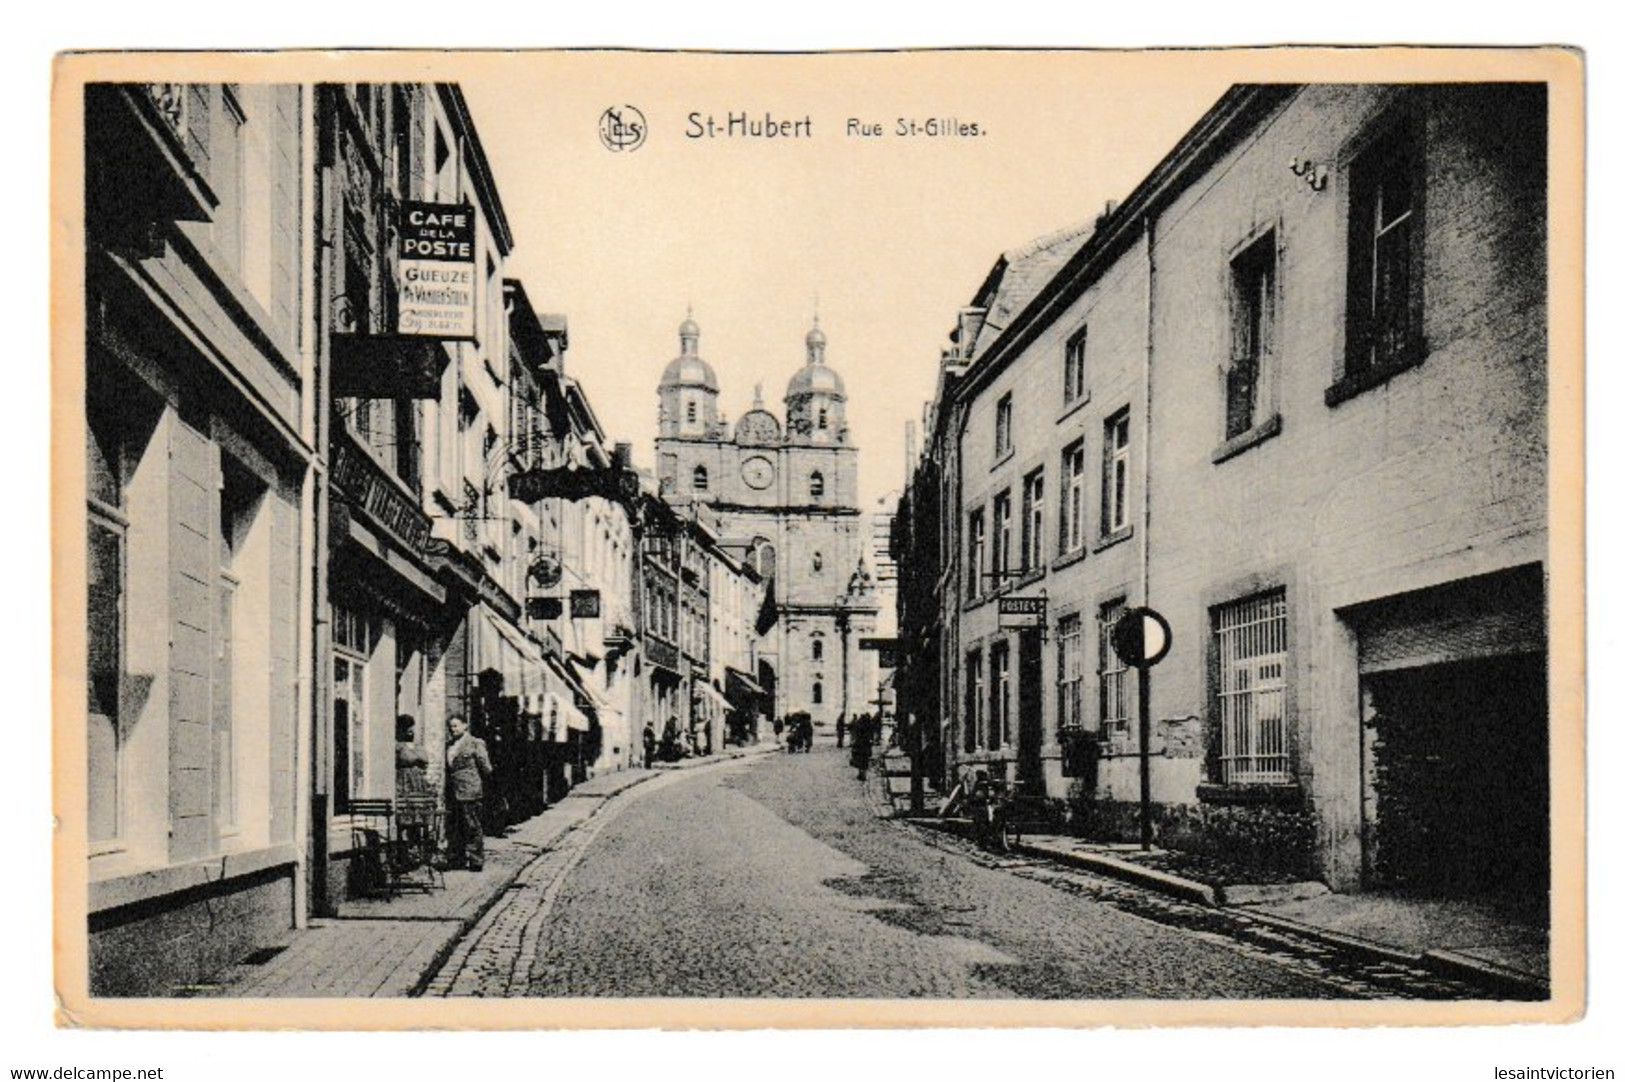 ST HUBERT RUE ST GILLES CATHEDRALE ANIMEE - Neufchâteau